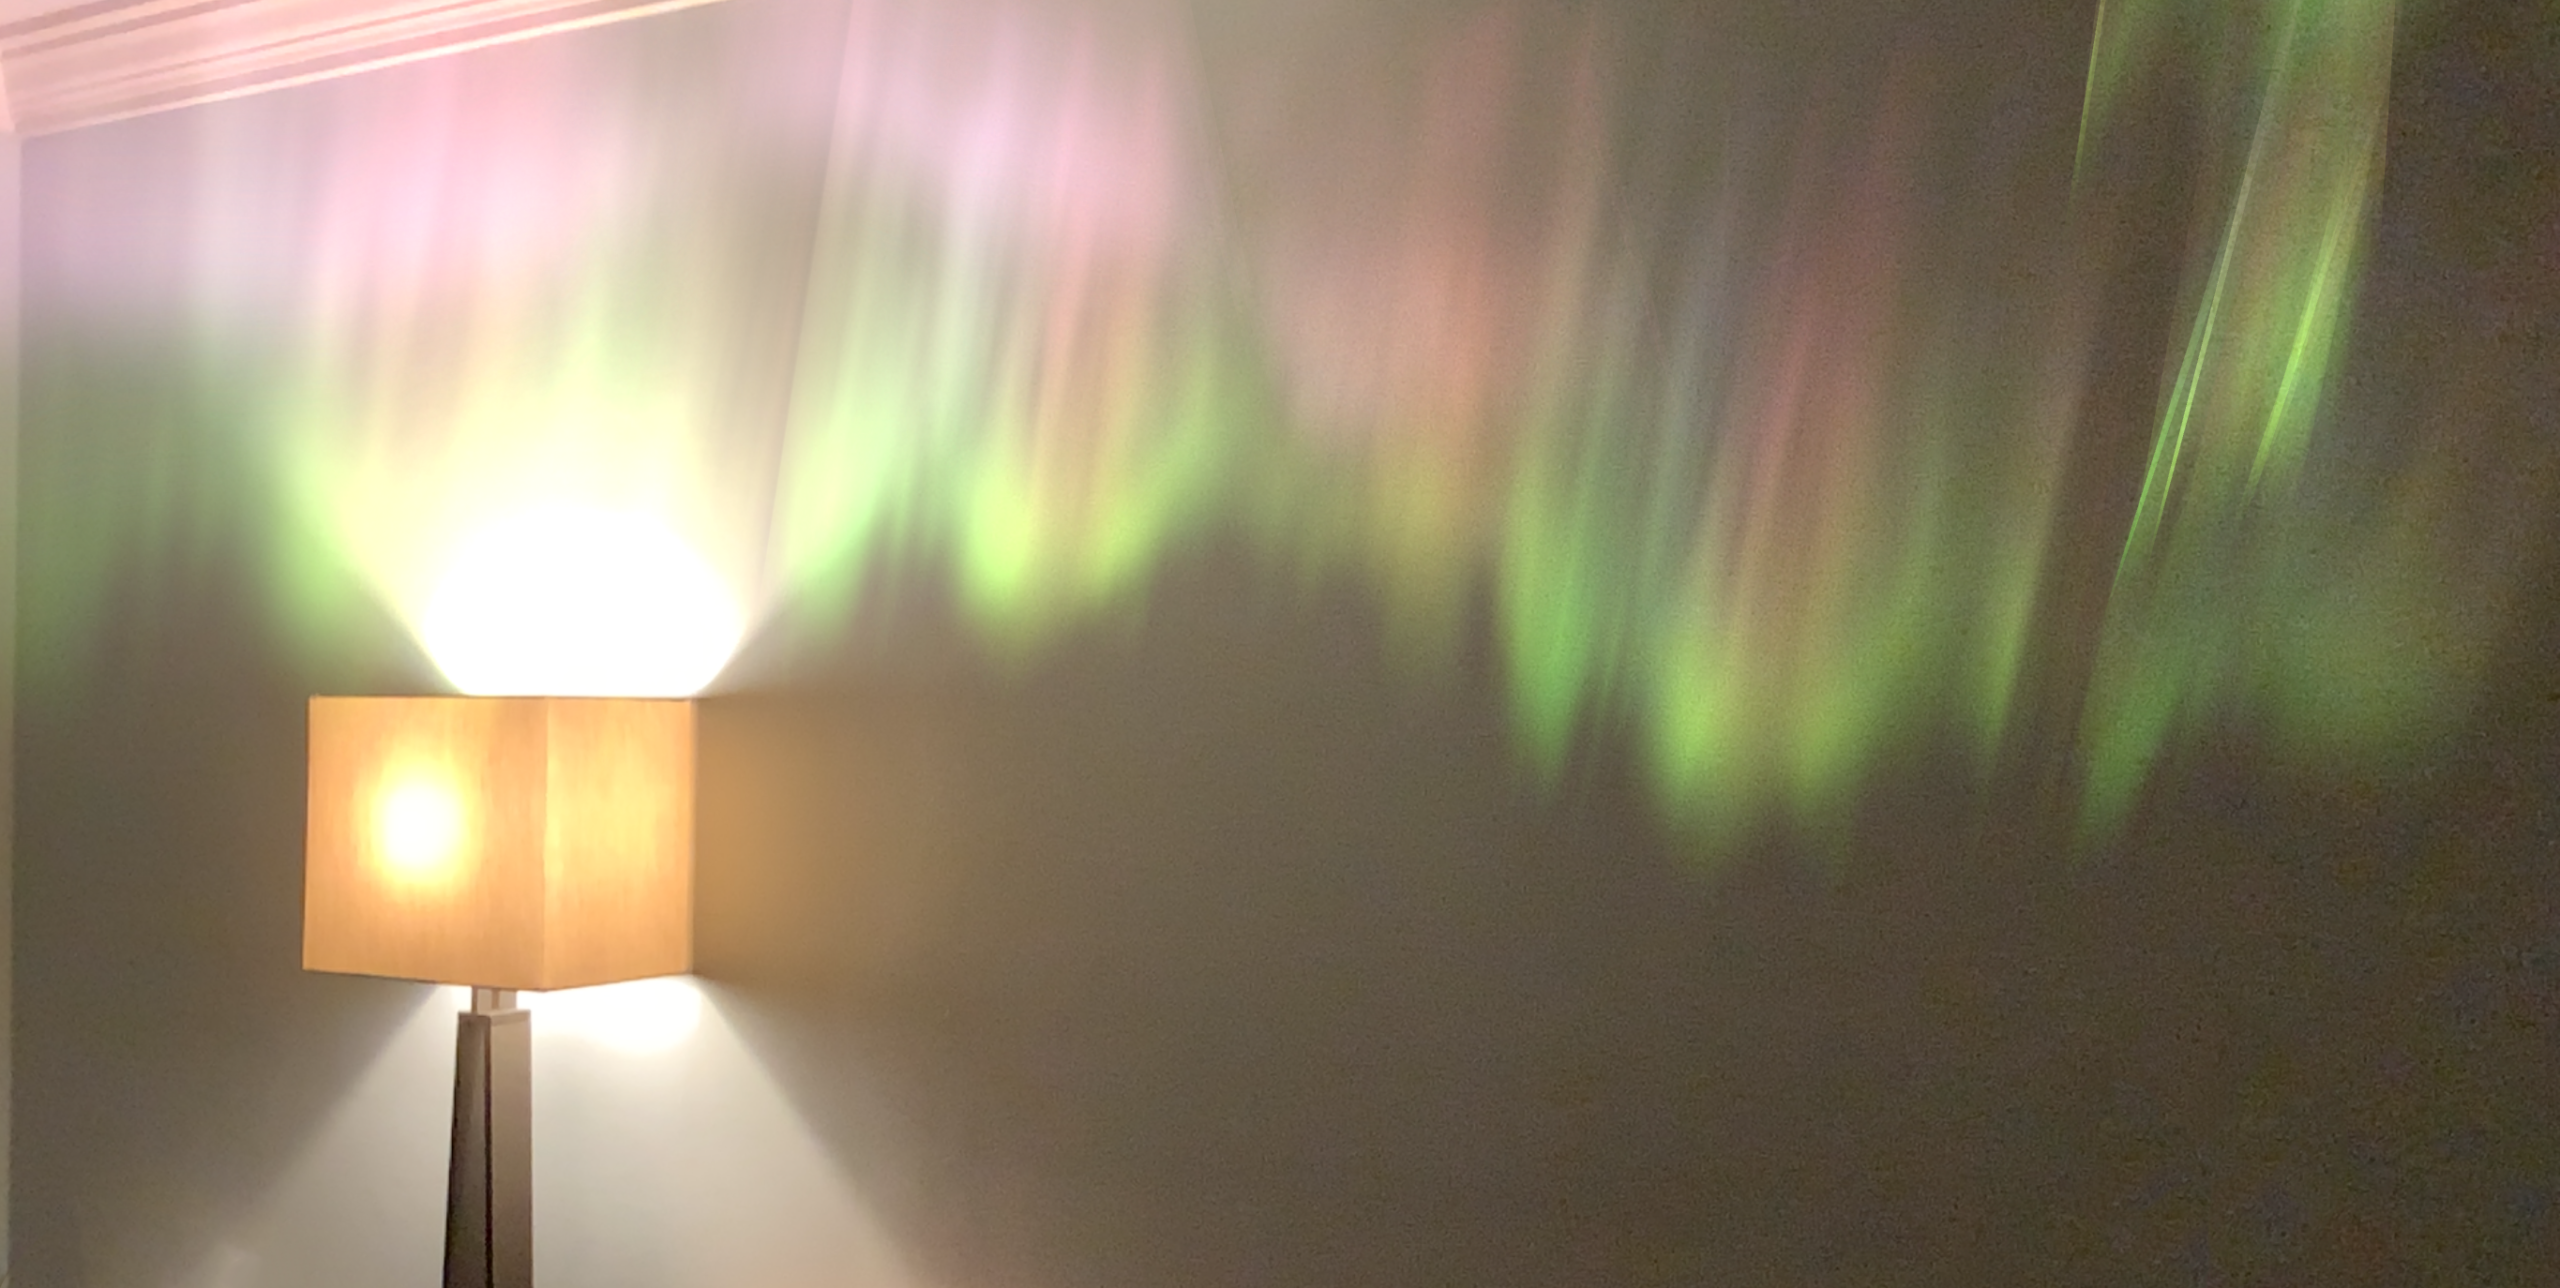 An augmented reality Aurora Borealis emerges from a lamp